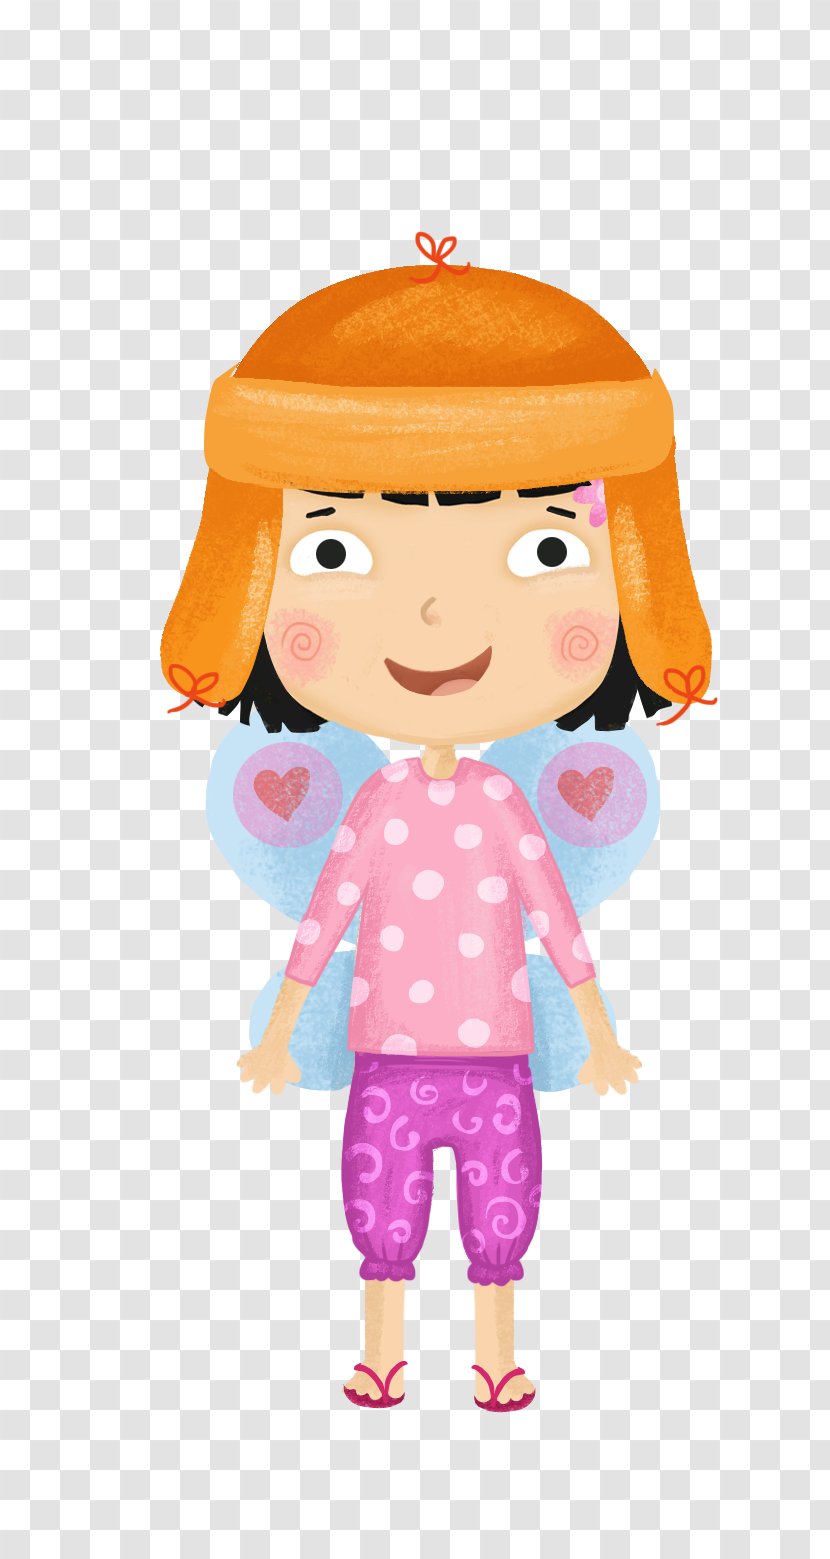 Toddler Doll Clip Art - Stuffed Toy Transparent PNG